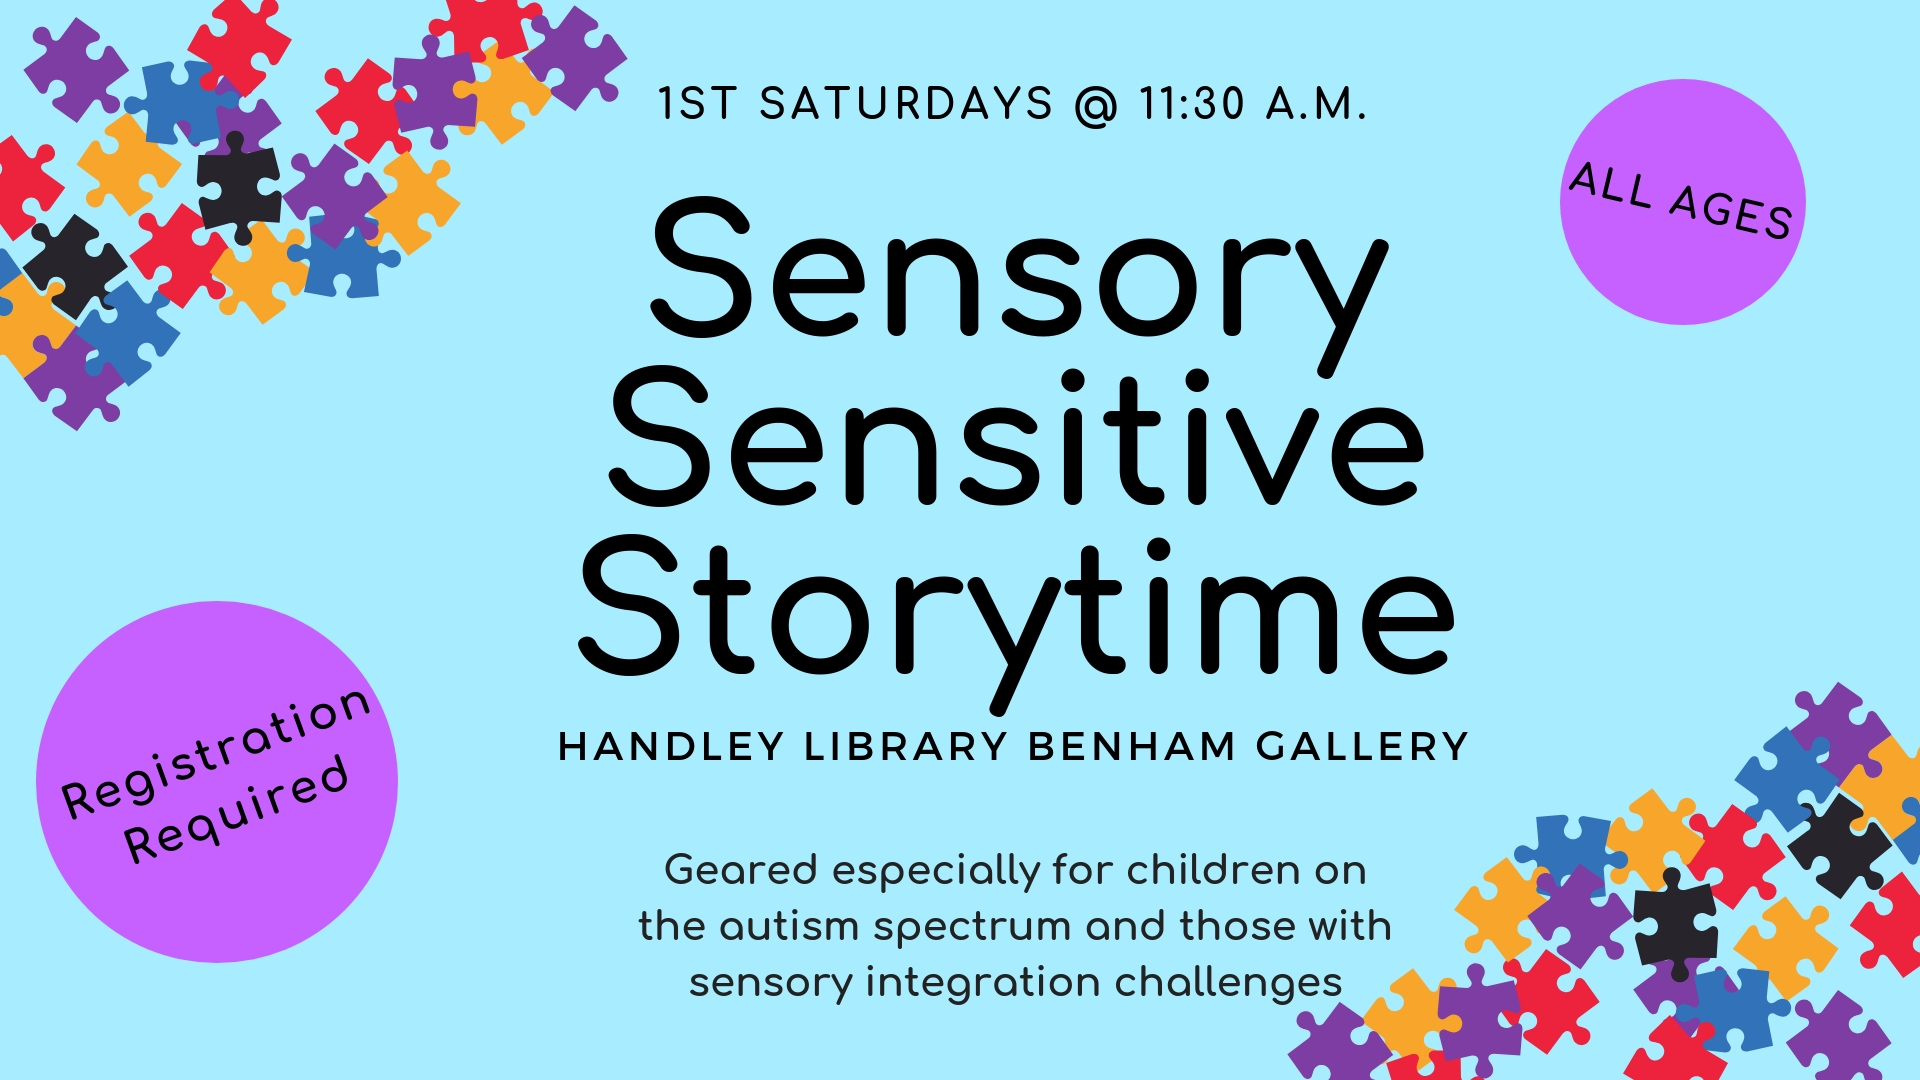 Informational banner for Sensory Sensitive Storytime with time, dates, and location of event series